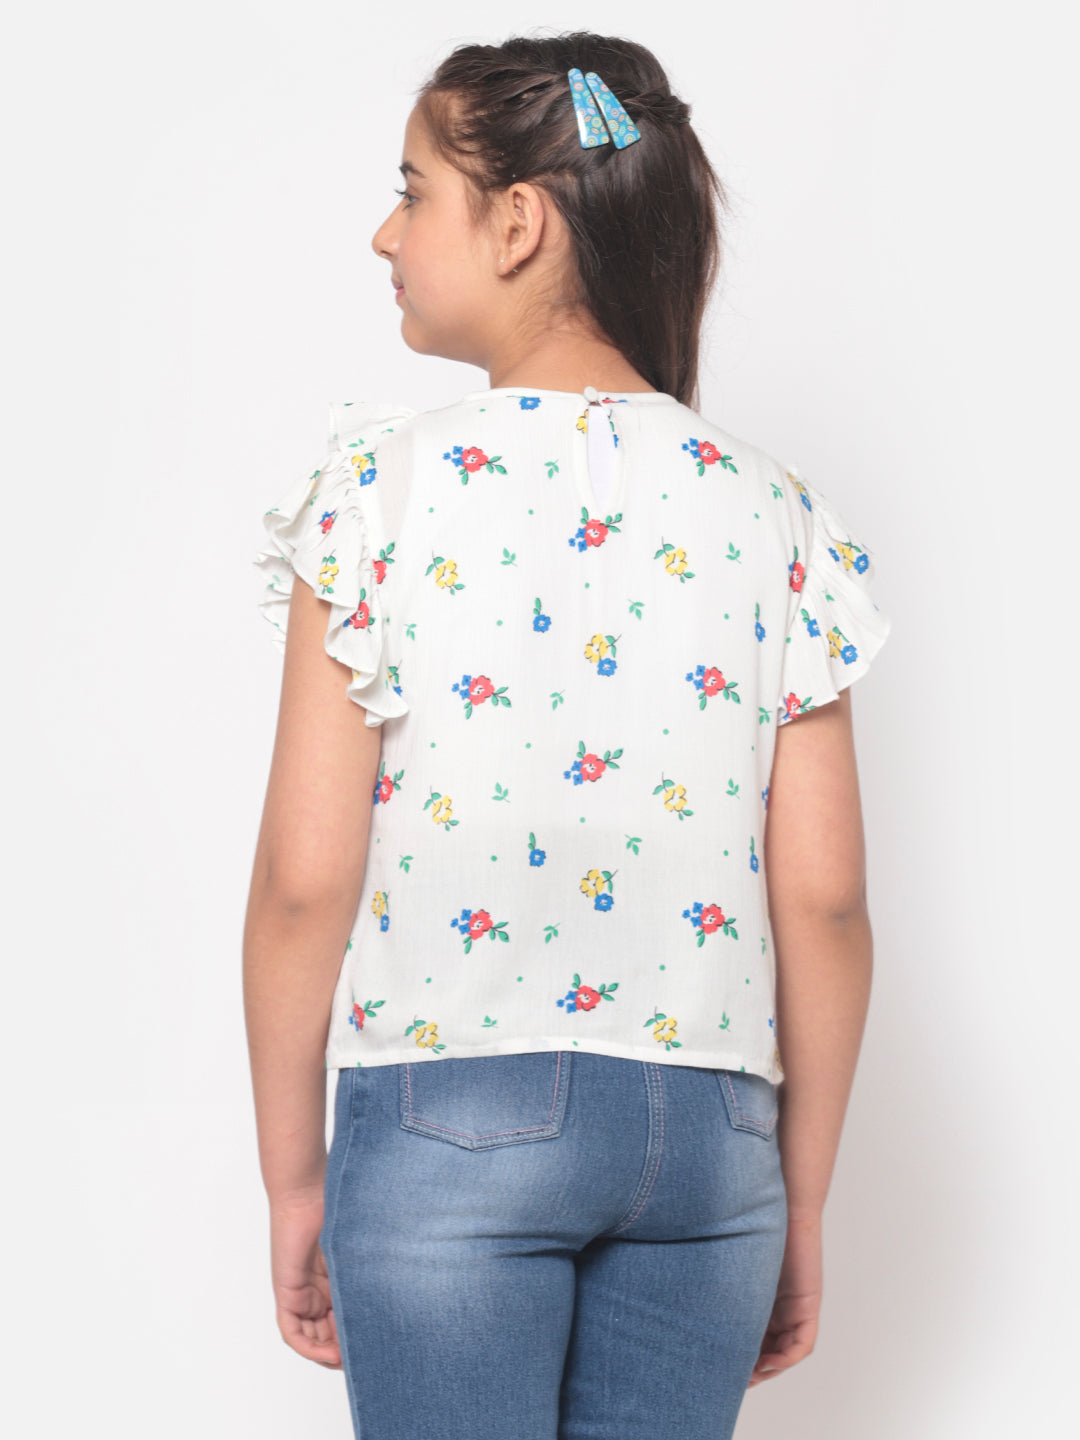 MINOS White Printed Frill Top